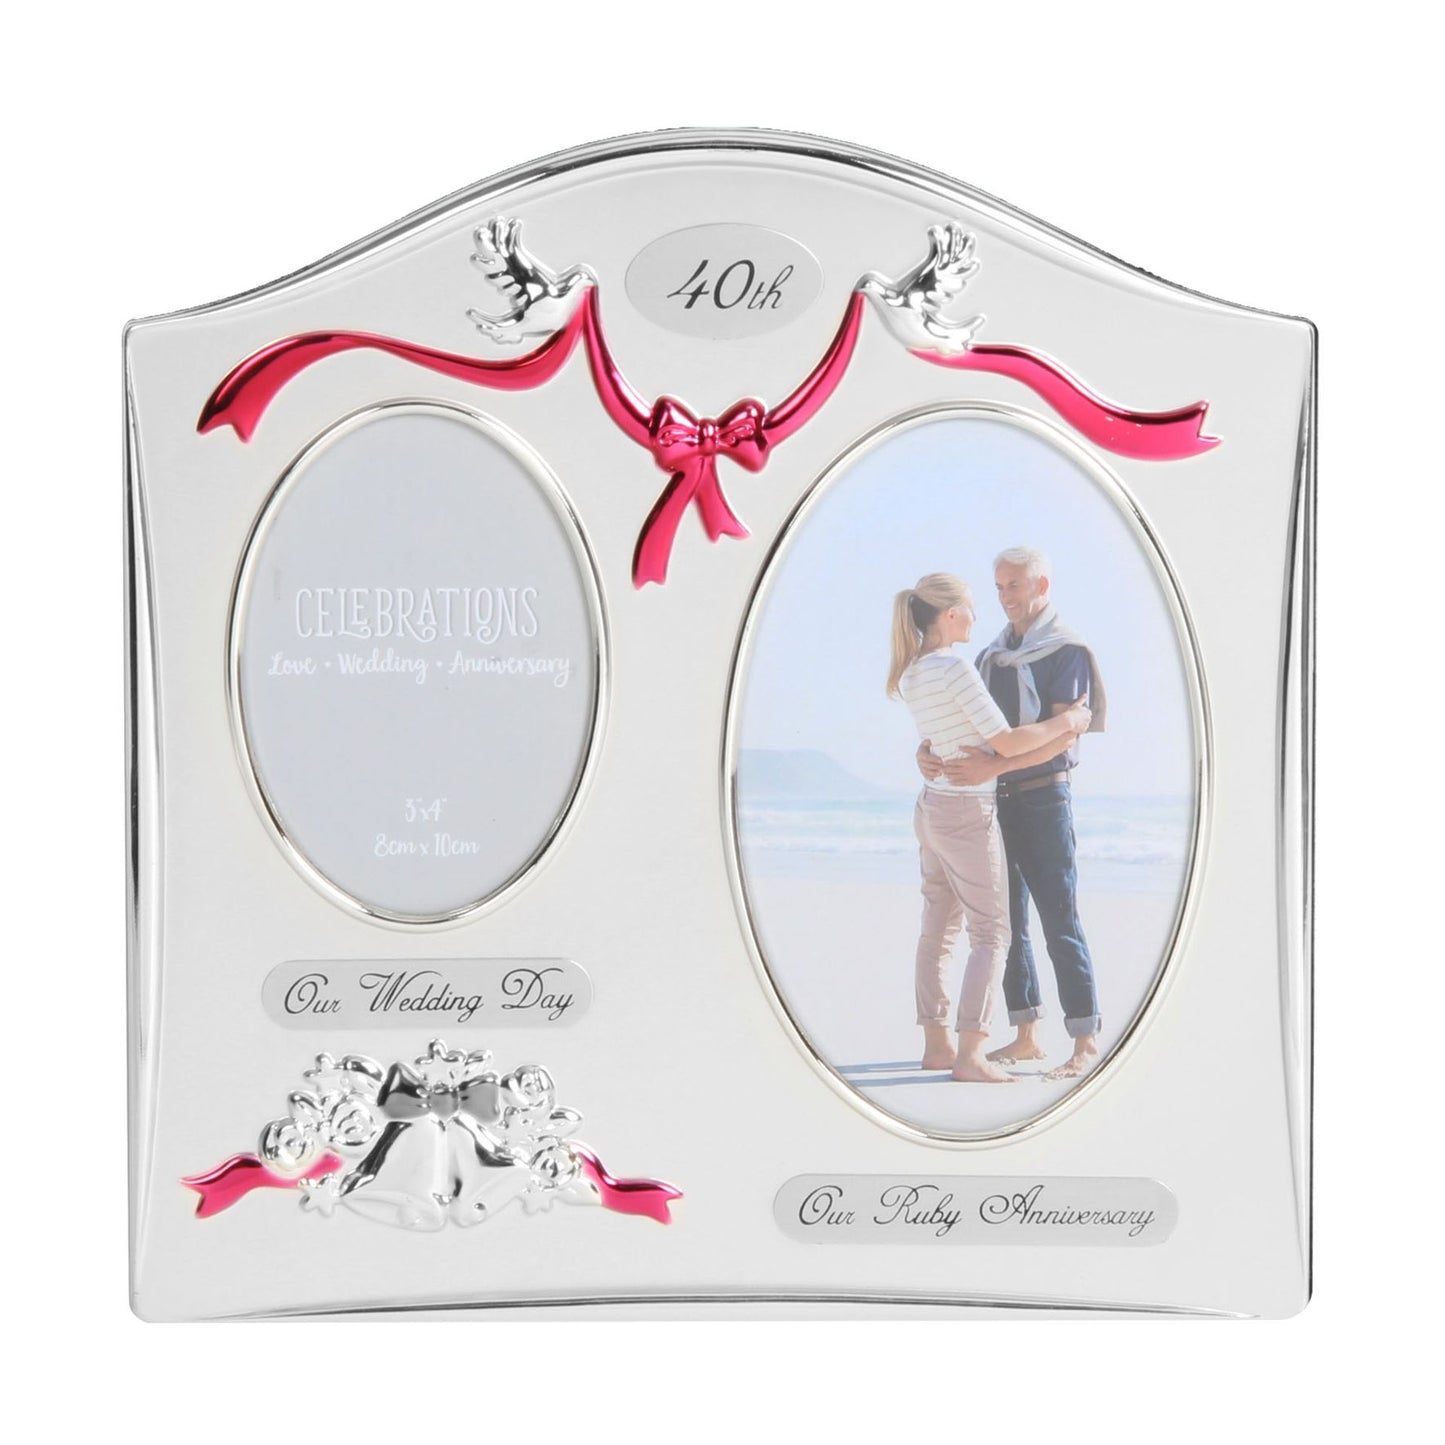 Juliana Photo Frame 2 Tone Silver Plated Double Wedding Anniversary - 40th Ruby FS55040